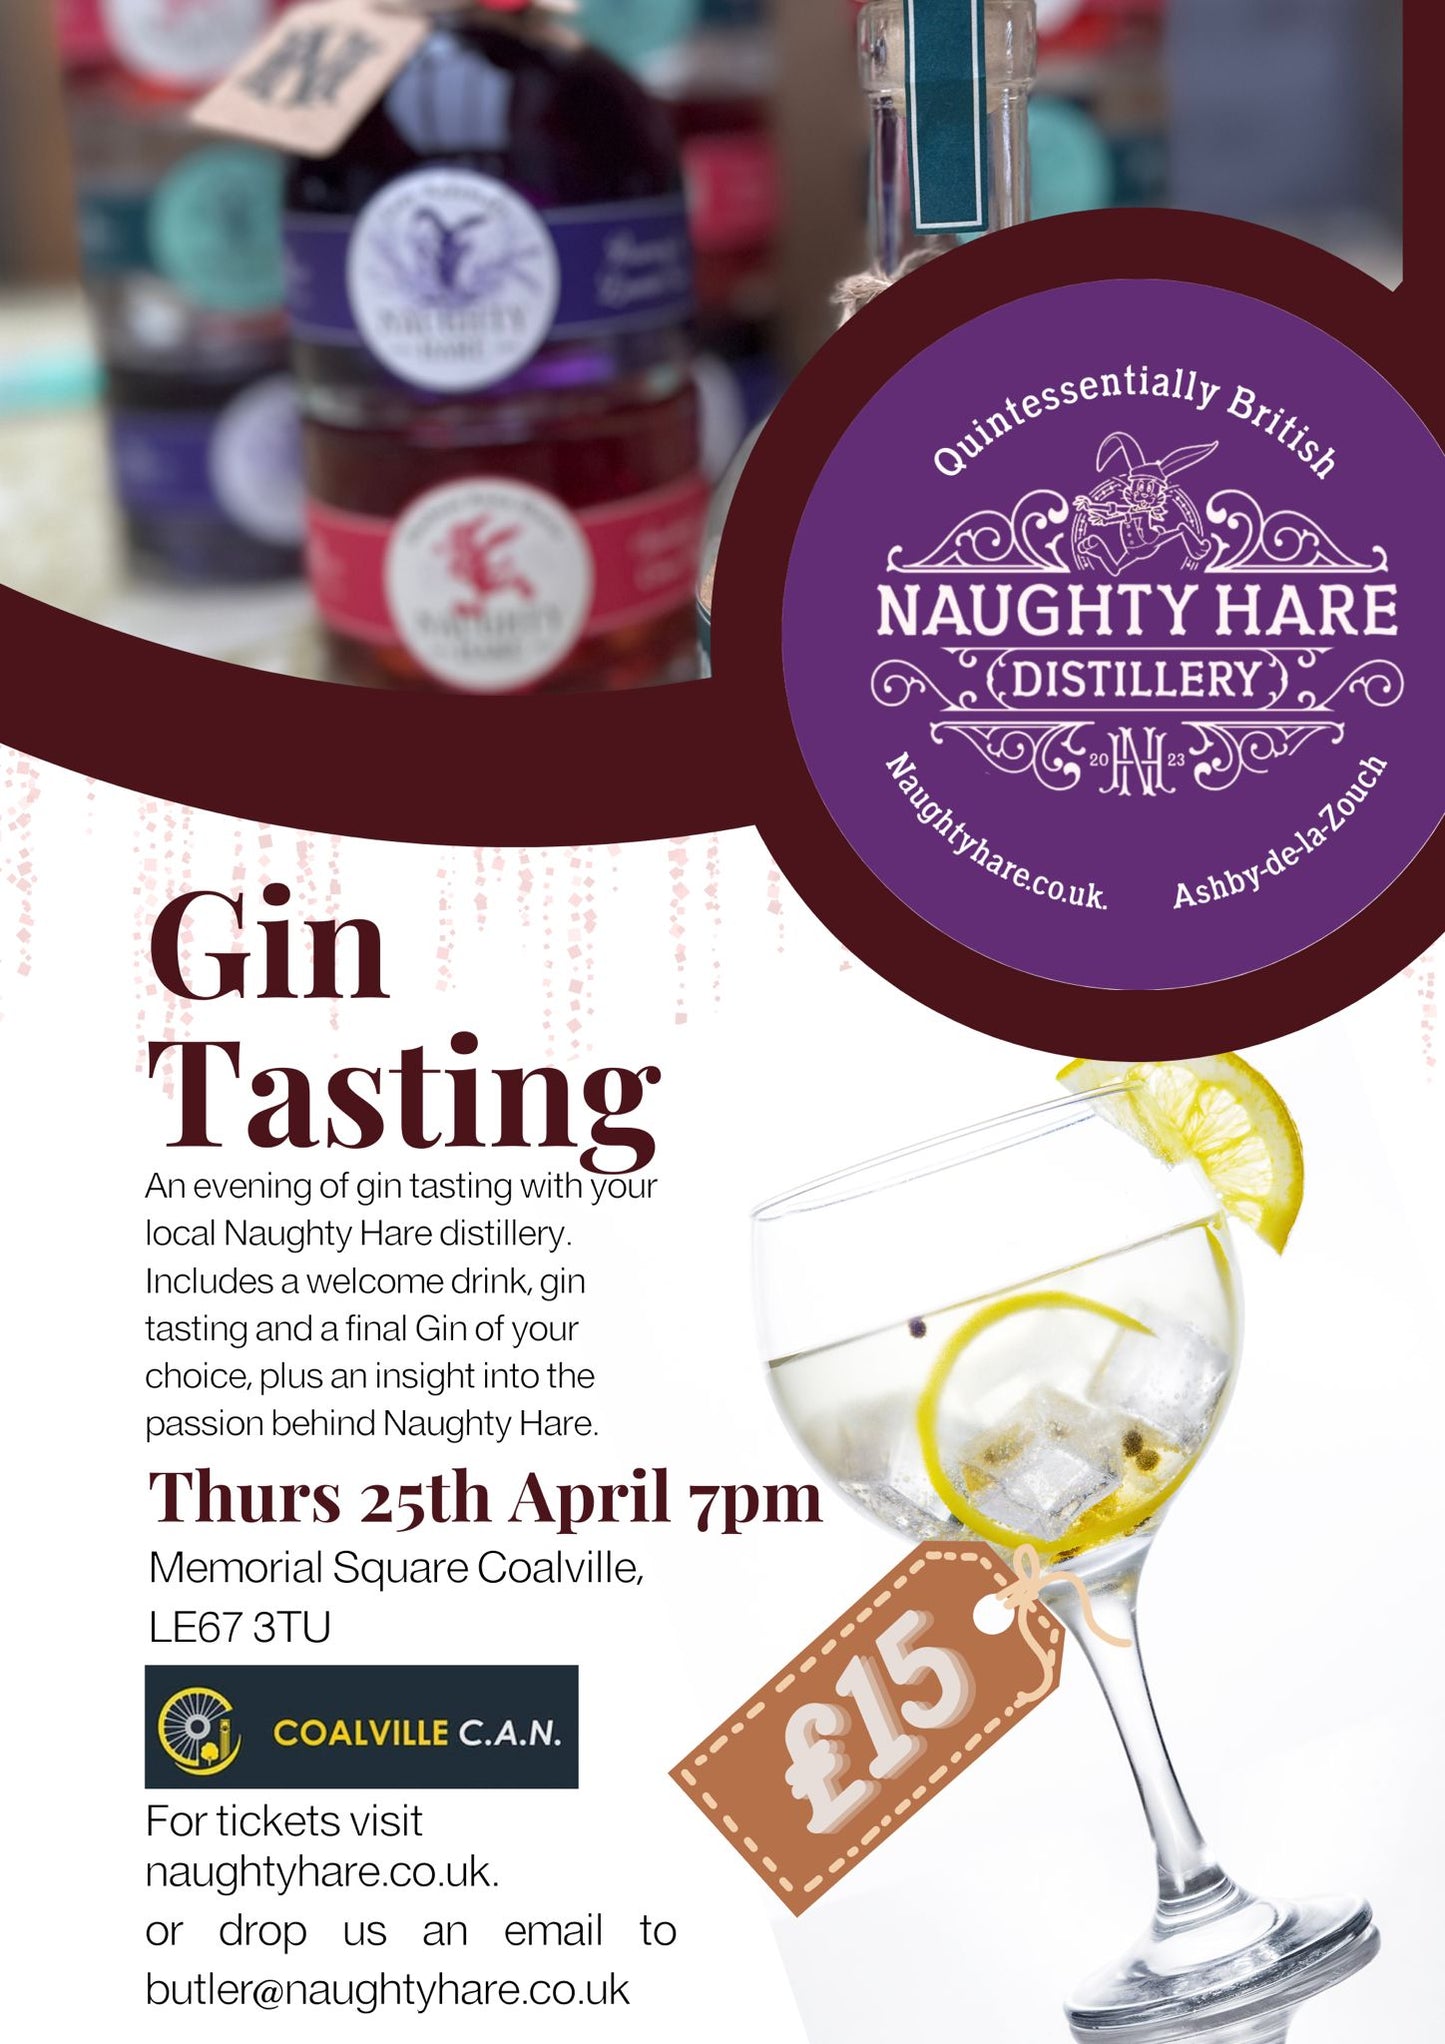 Gin Tasting with Naughty Hare Distillery